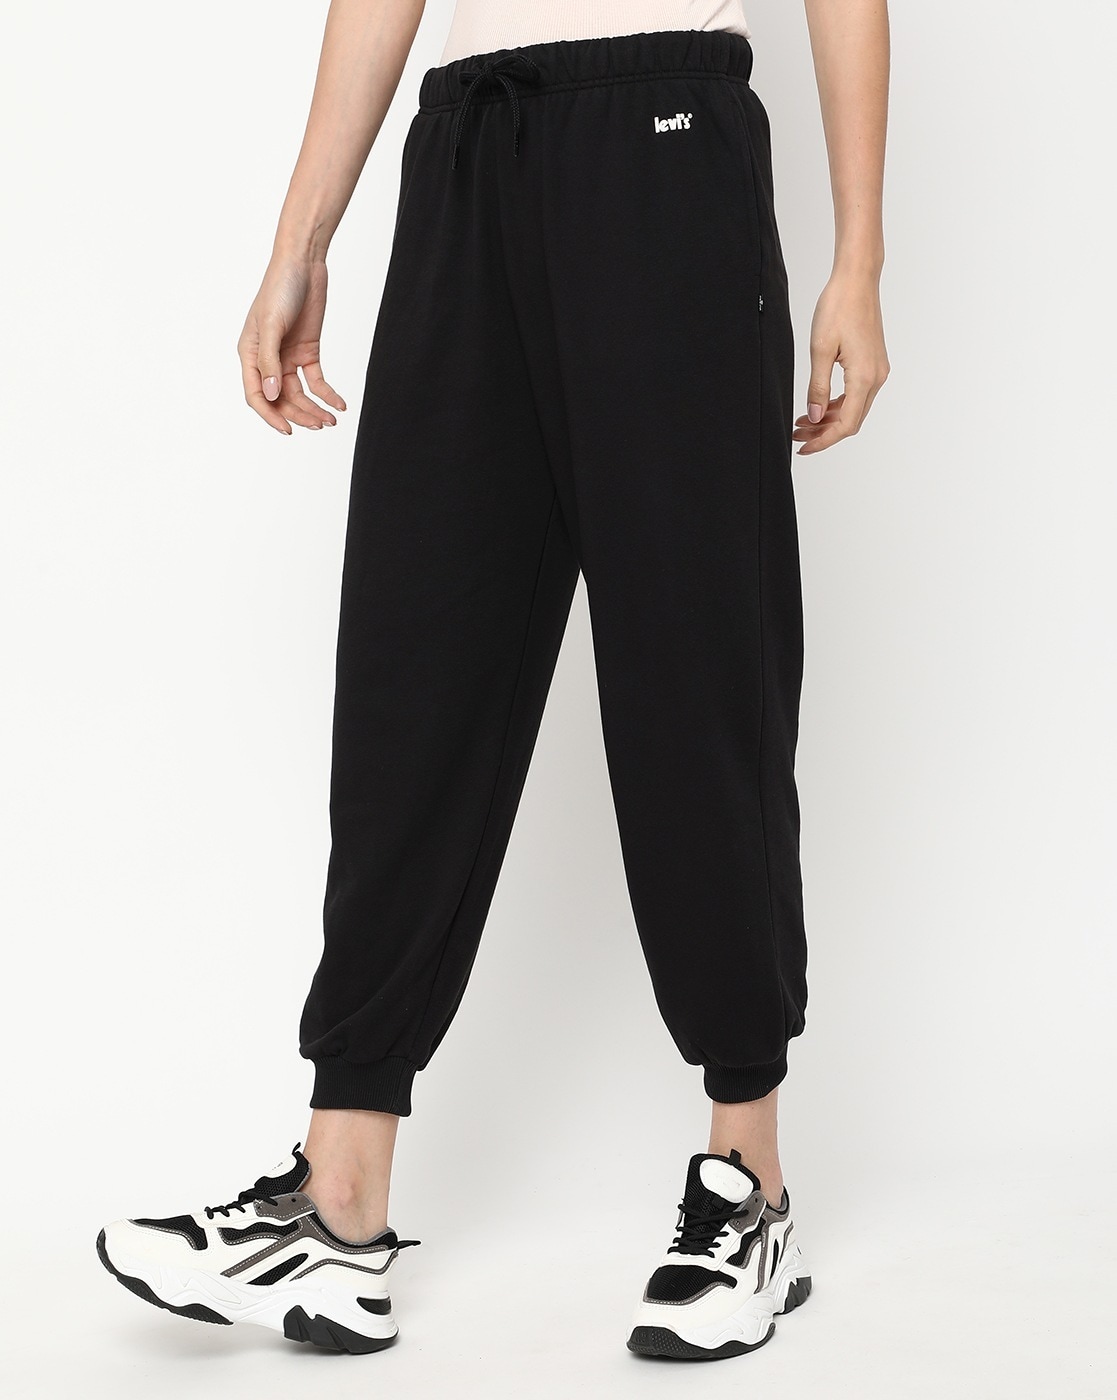 Buy Black Trousers & Pants for Women by LEVIS Online 